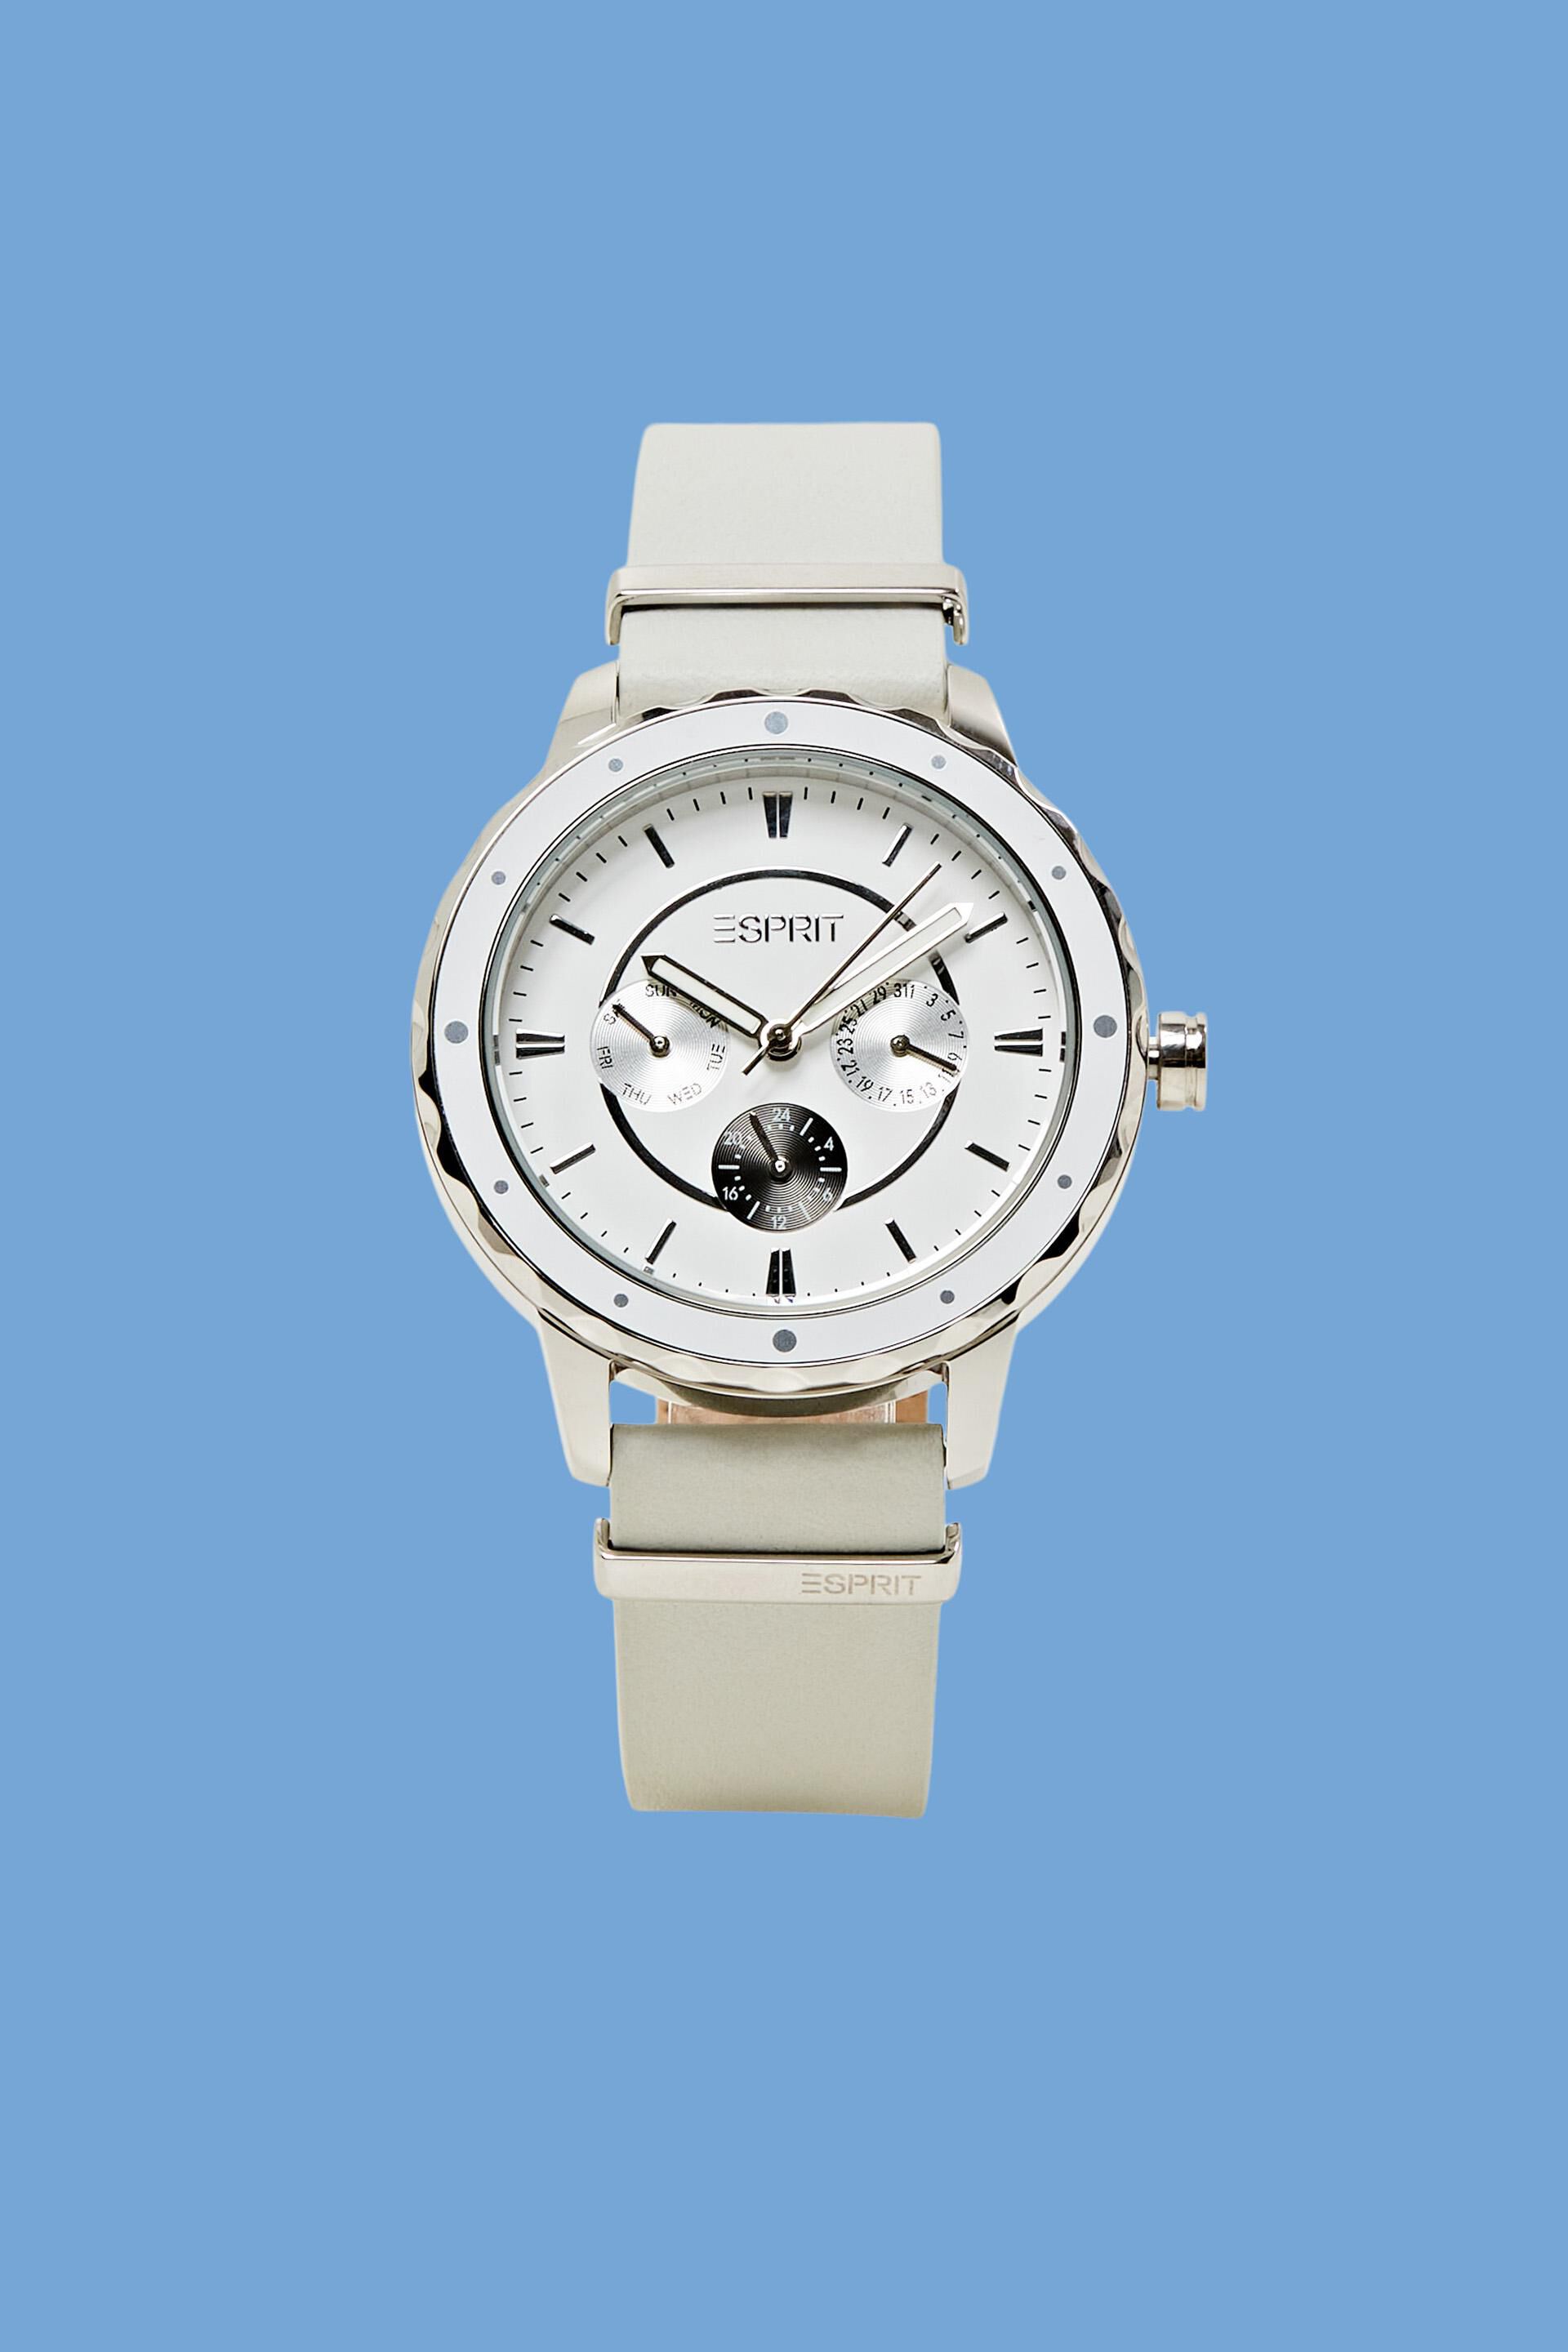 Esprit Online Store Multi-function watch with strap leather